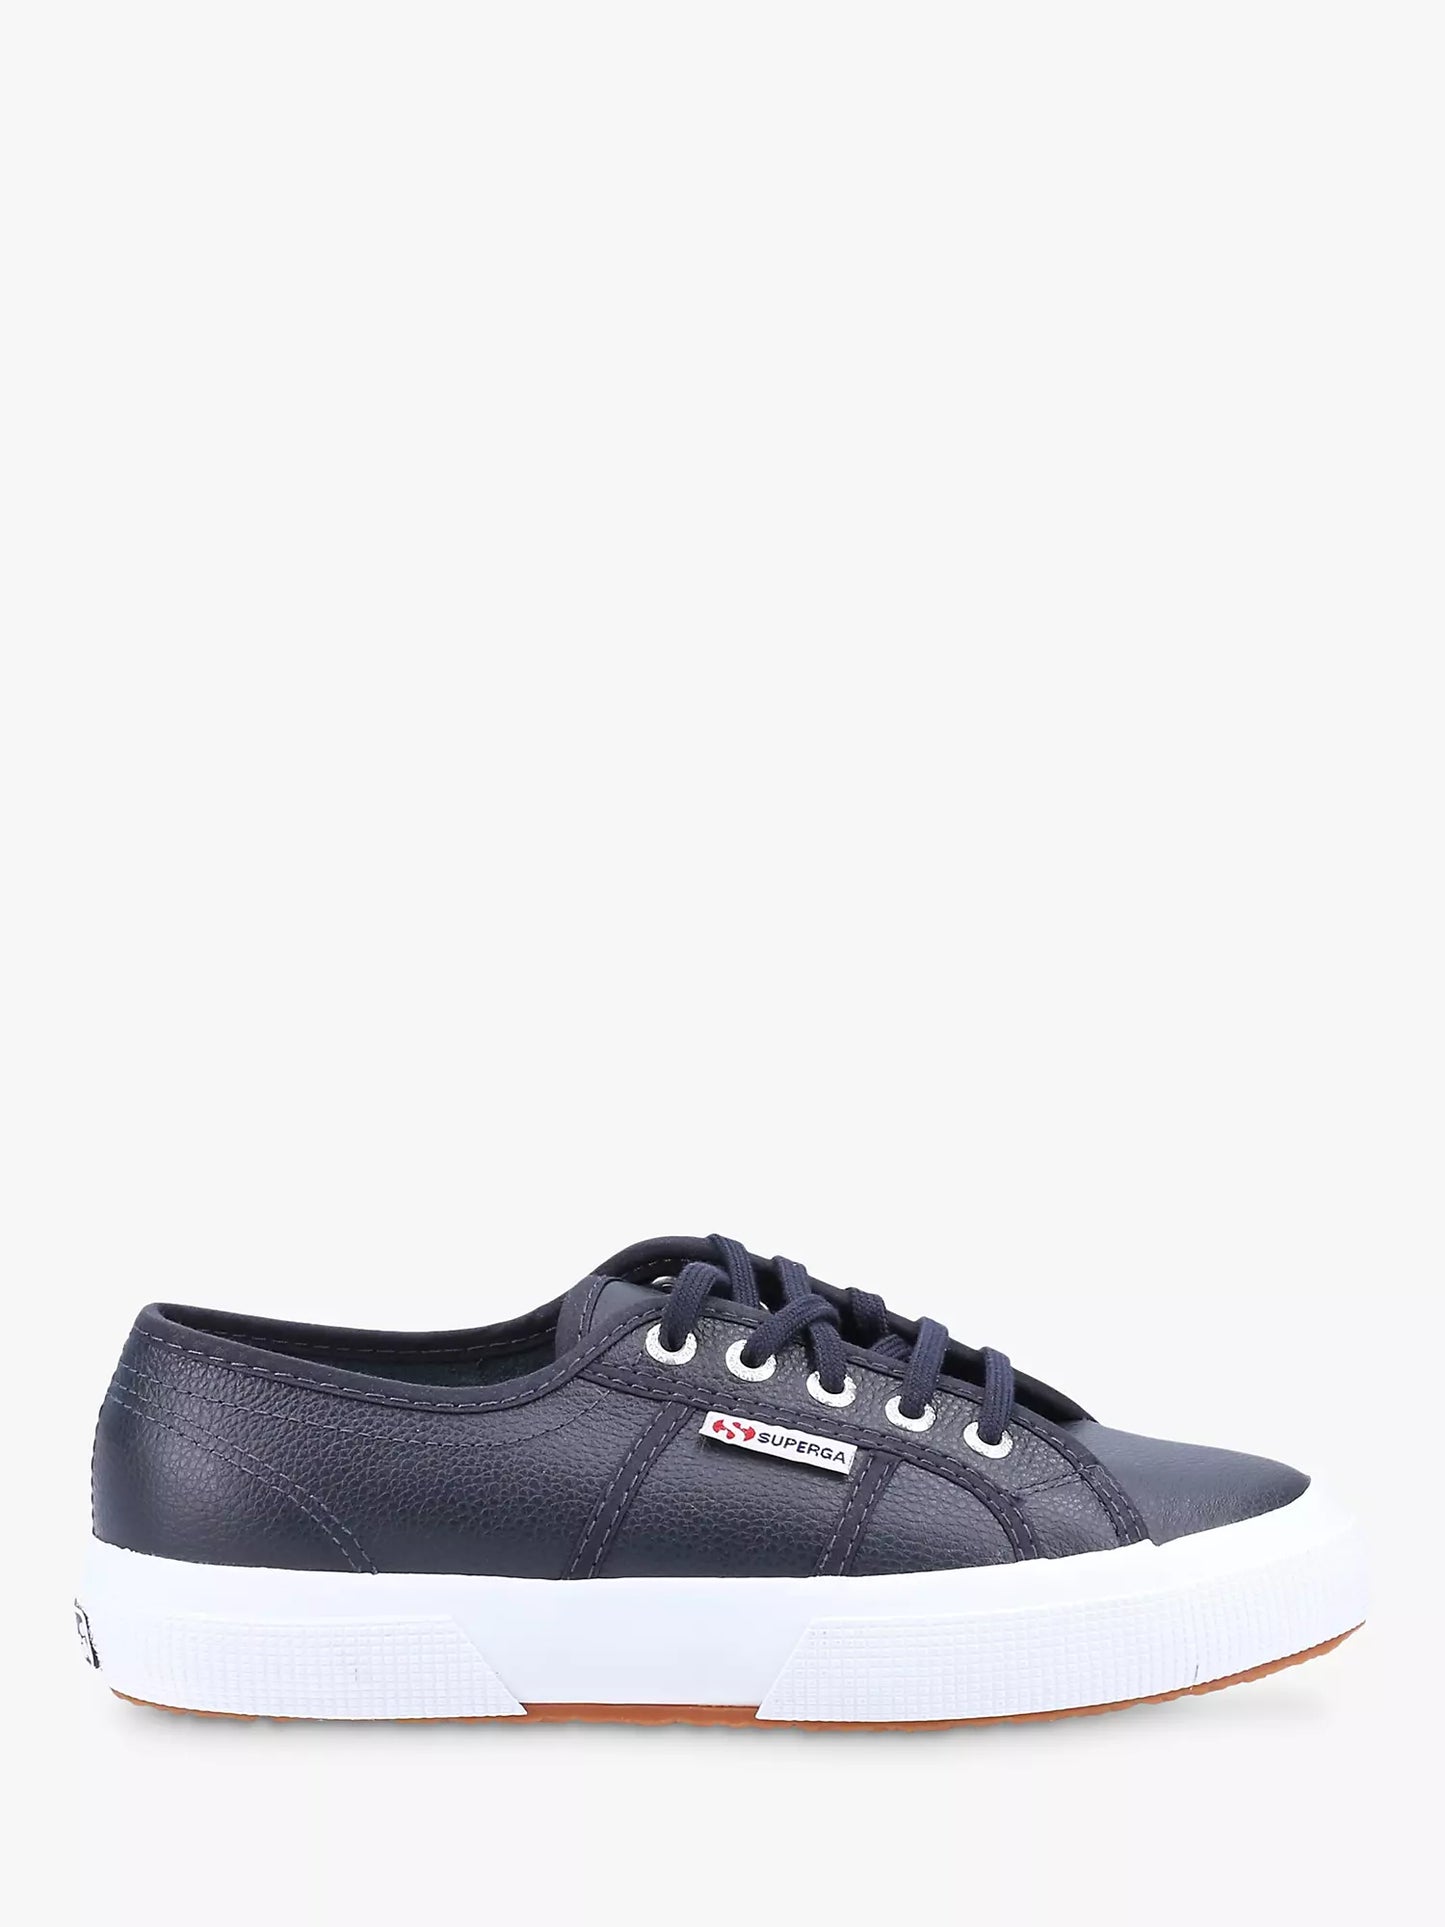 Superga Men's 2750 Tumbled Leather Classic Sneakers Blue Navy